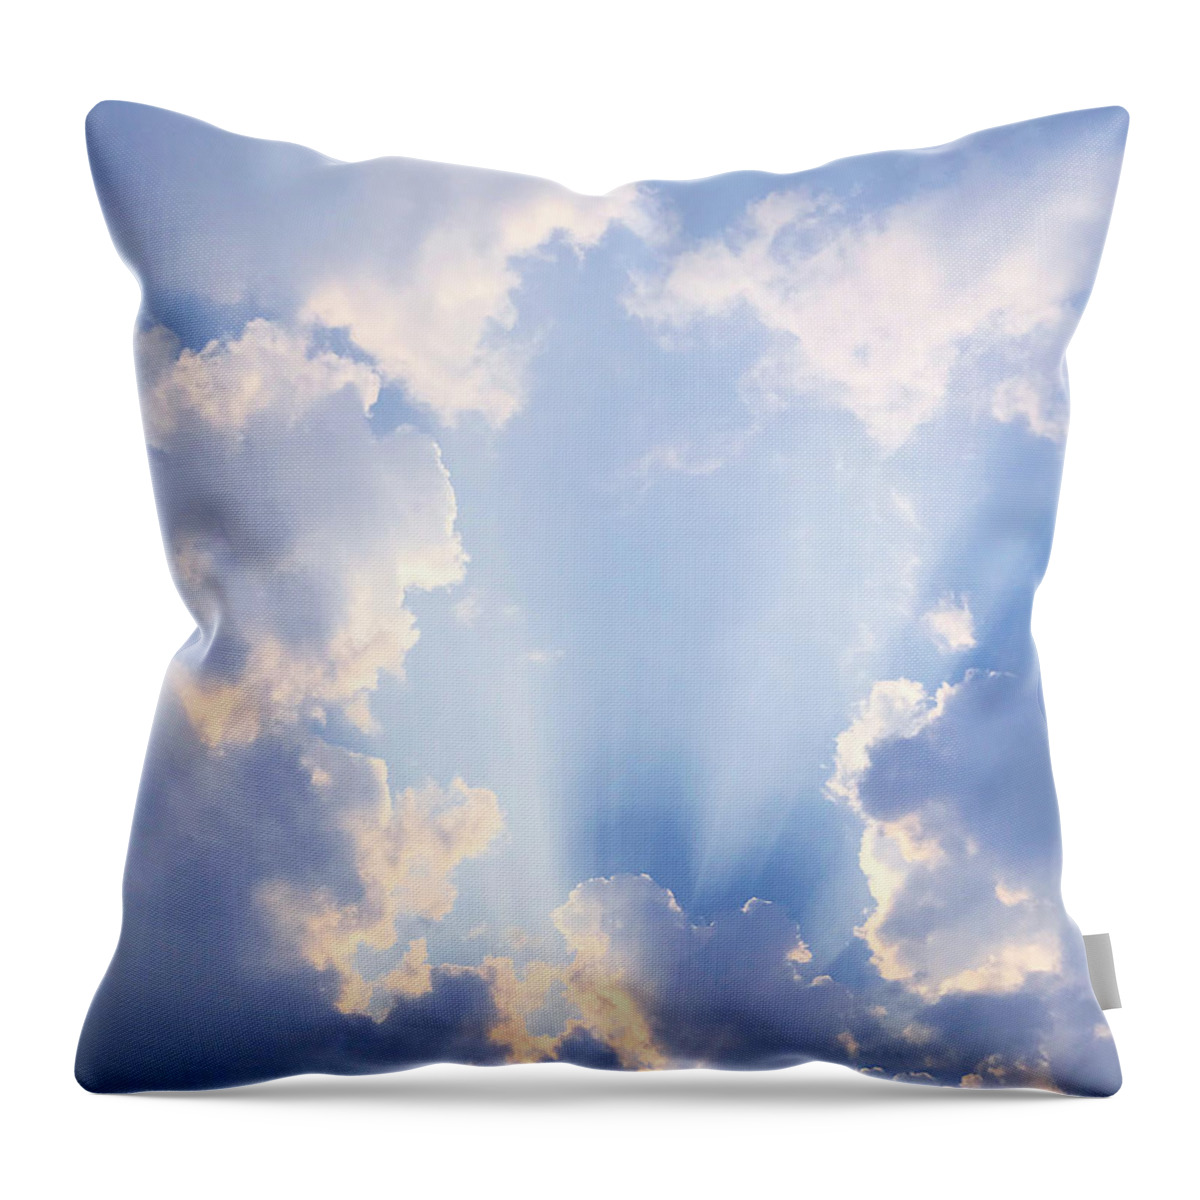 Clouds Throw Pillow featuring the photograph Love in the Clouds #2 by Dorrene BrownButterfield